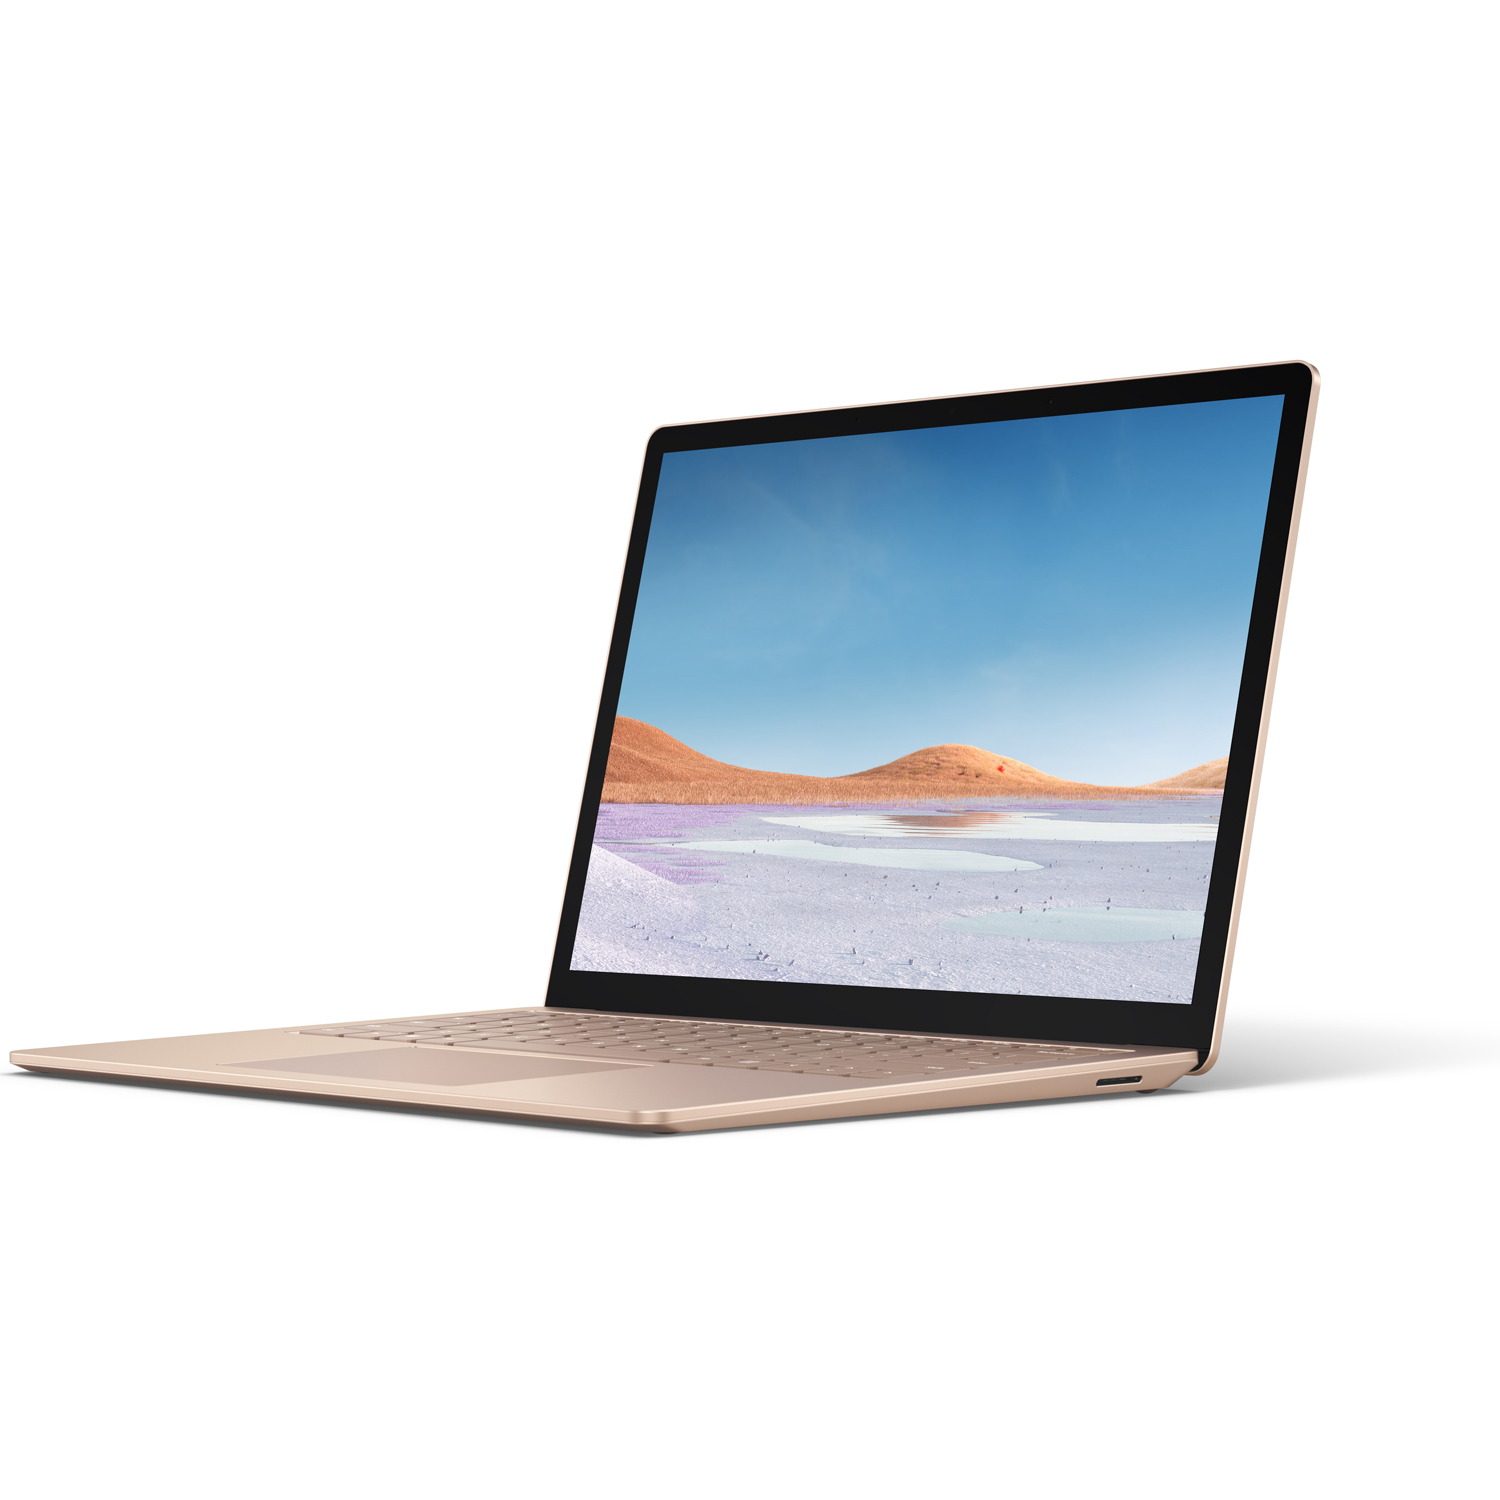 Microsoft VEF-00064 Surface Laptop 3  13.5" Touch-Screen  Intel Core i7  16GB Memory - 256GB Solid State Drive, Sandstone